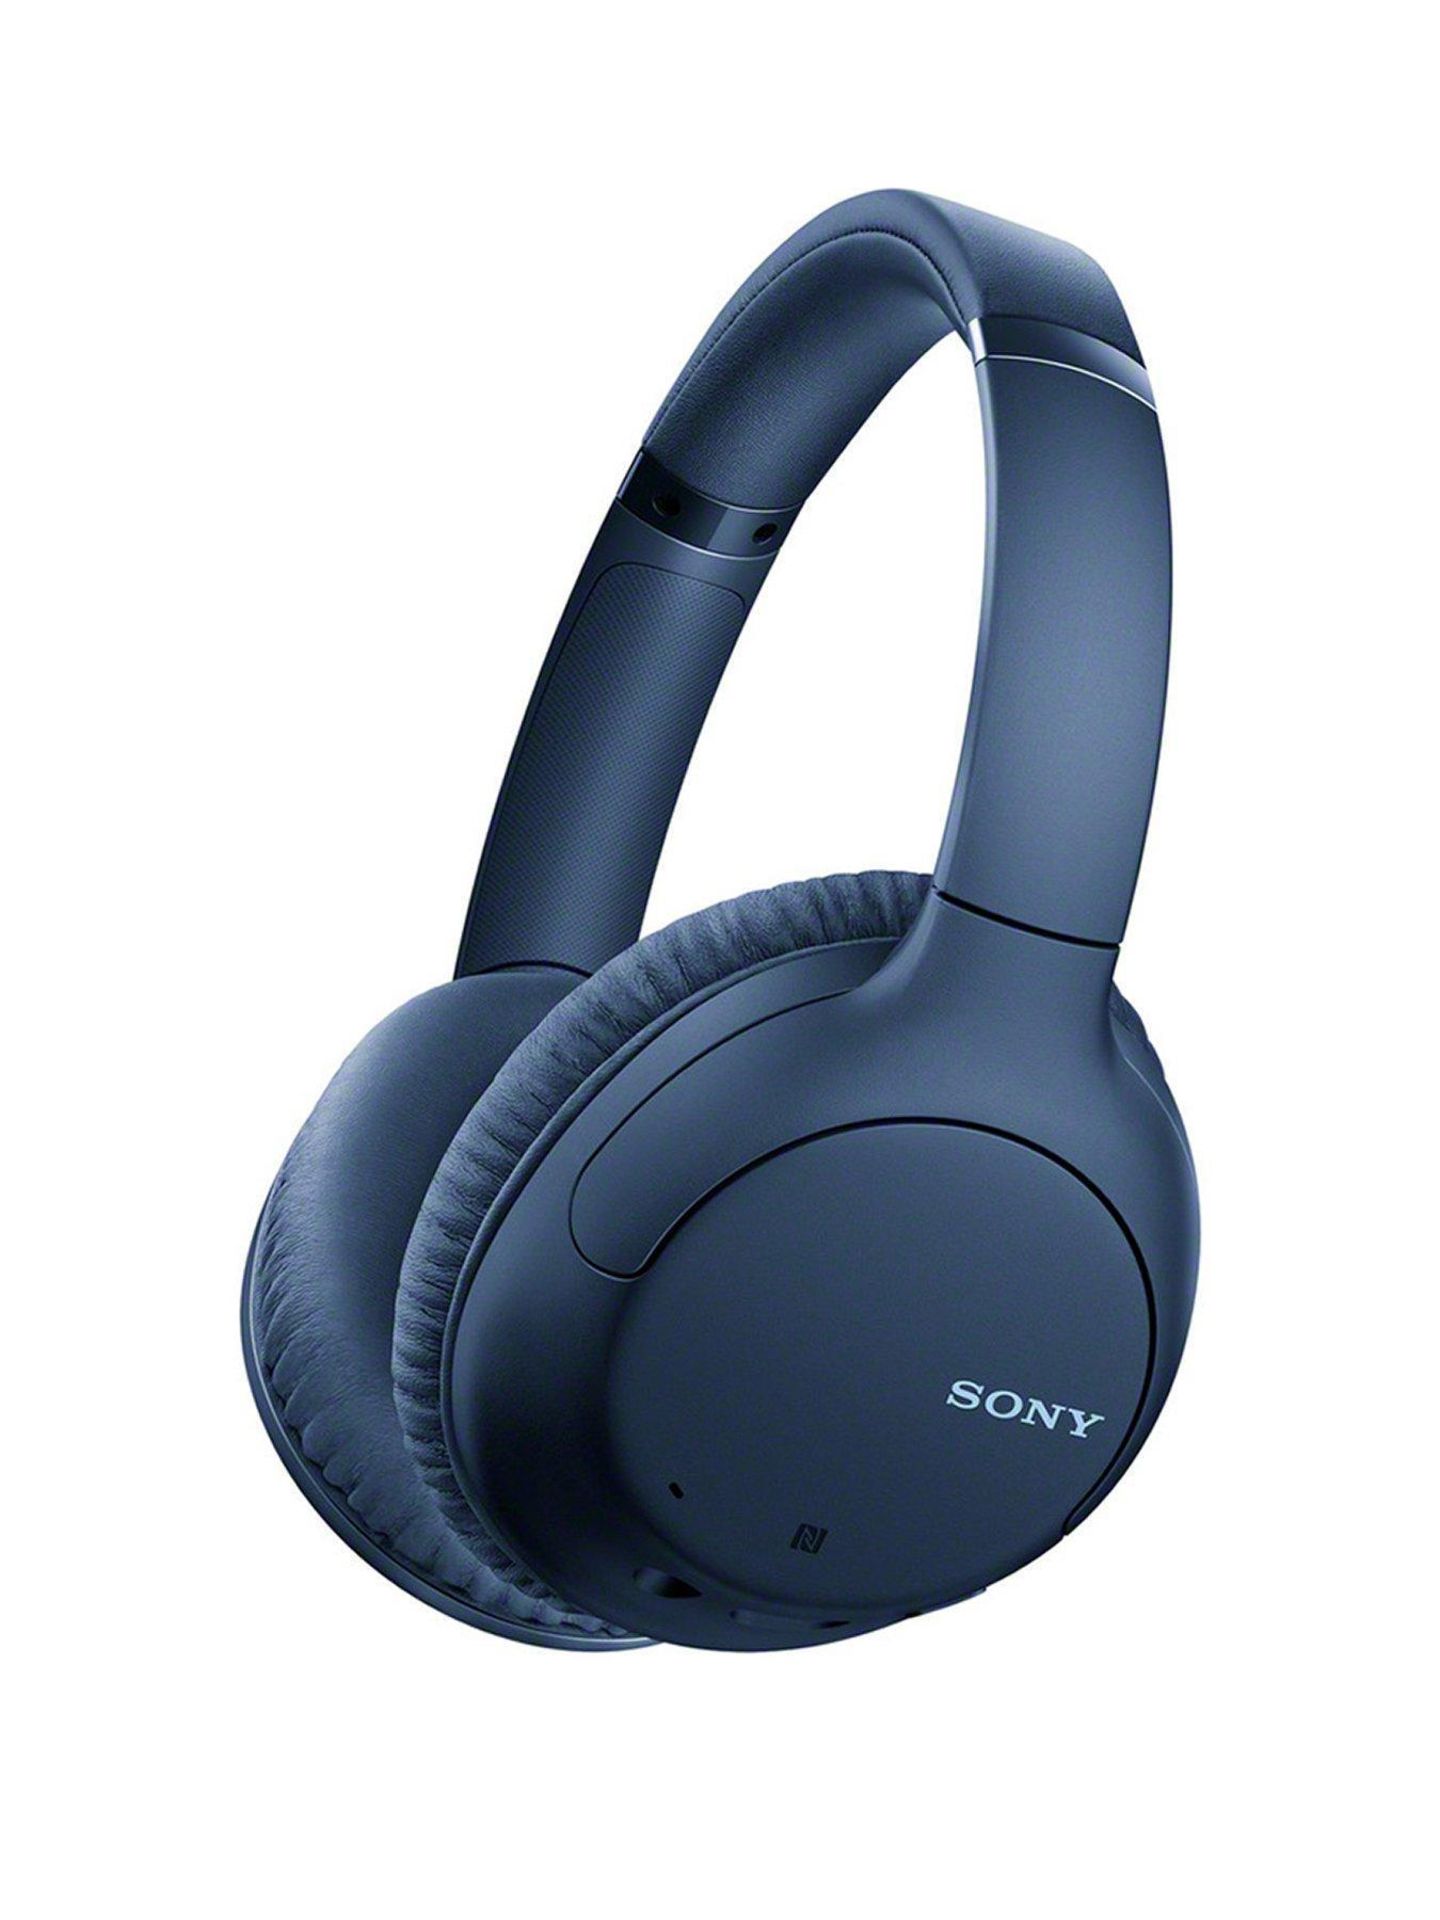 Sony wh-ch710n noise cancelling wireless headphones,built-in mic headphones [blue] rrp: £202.0 - Image 2 of 2